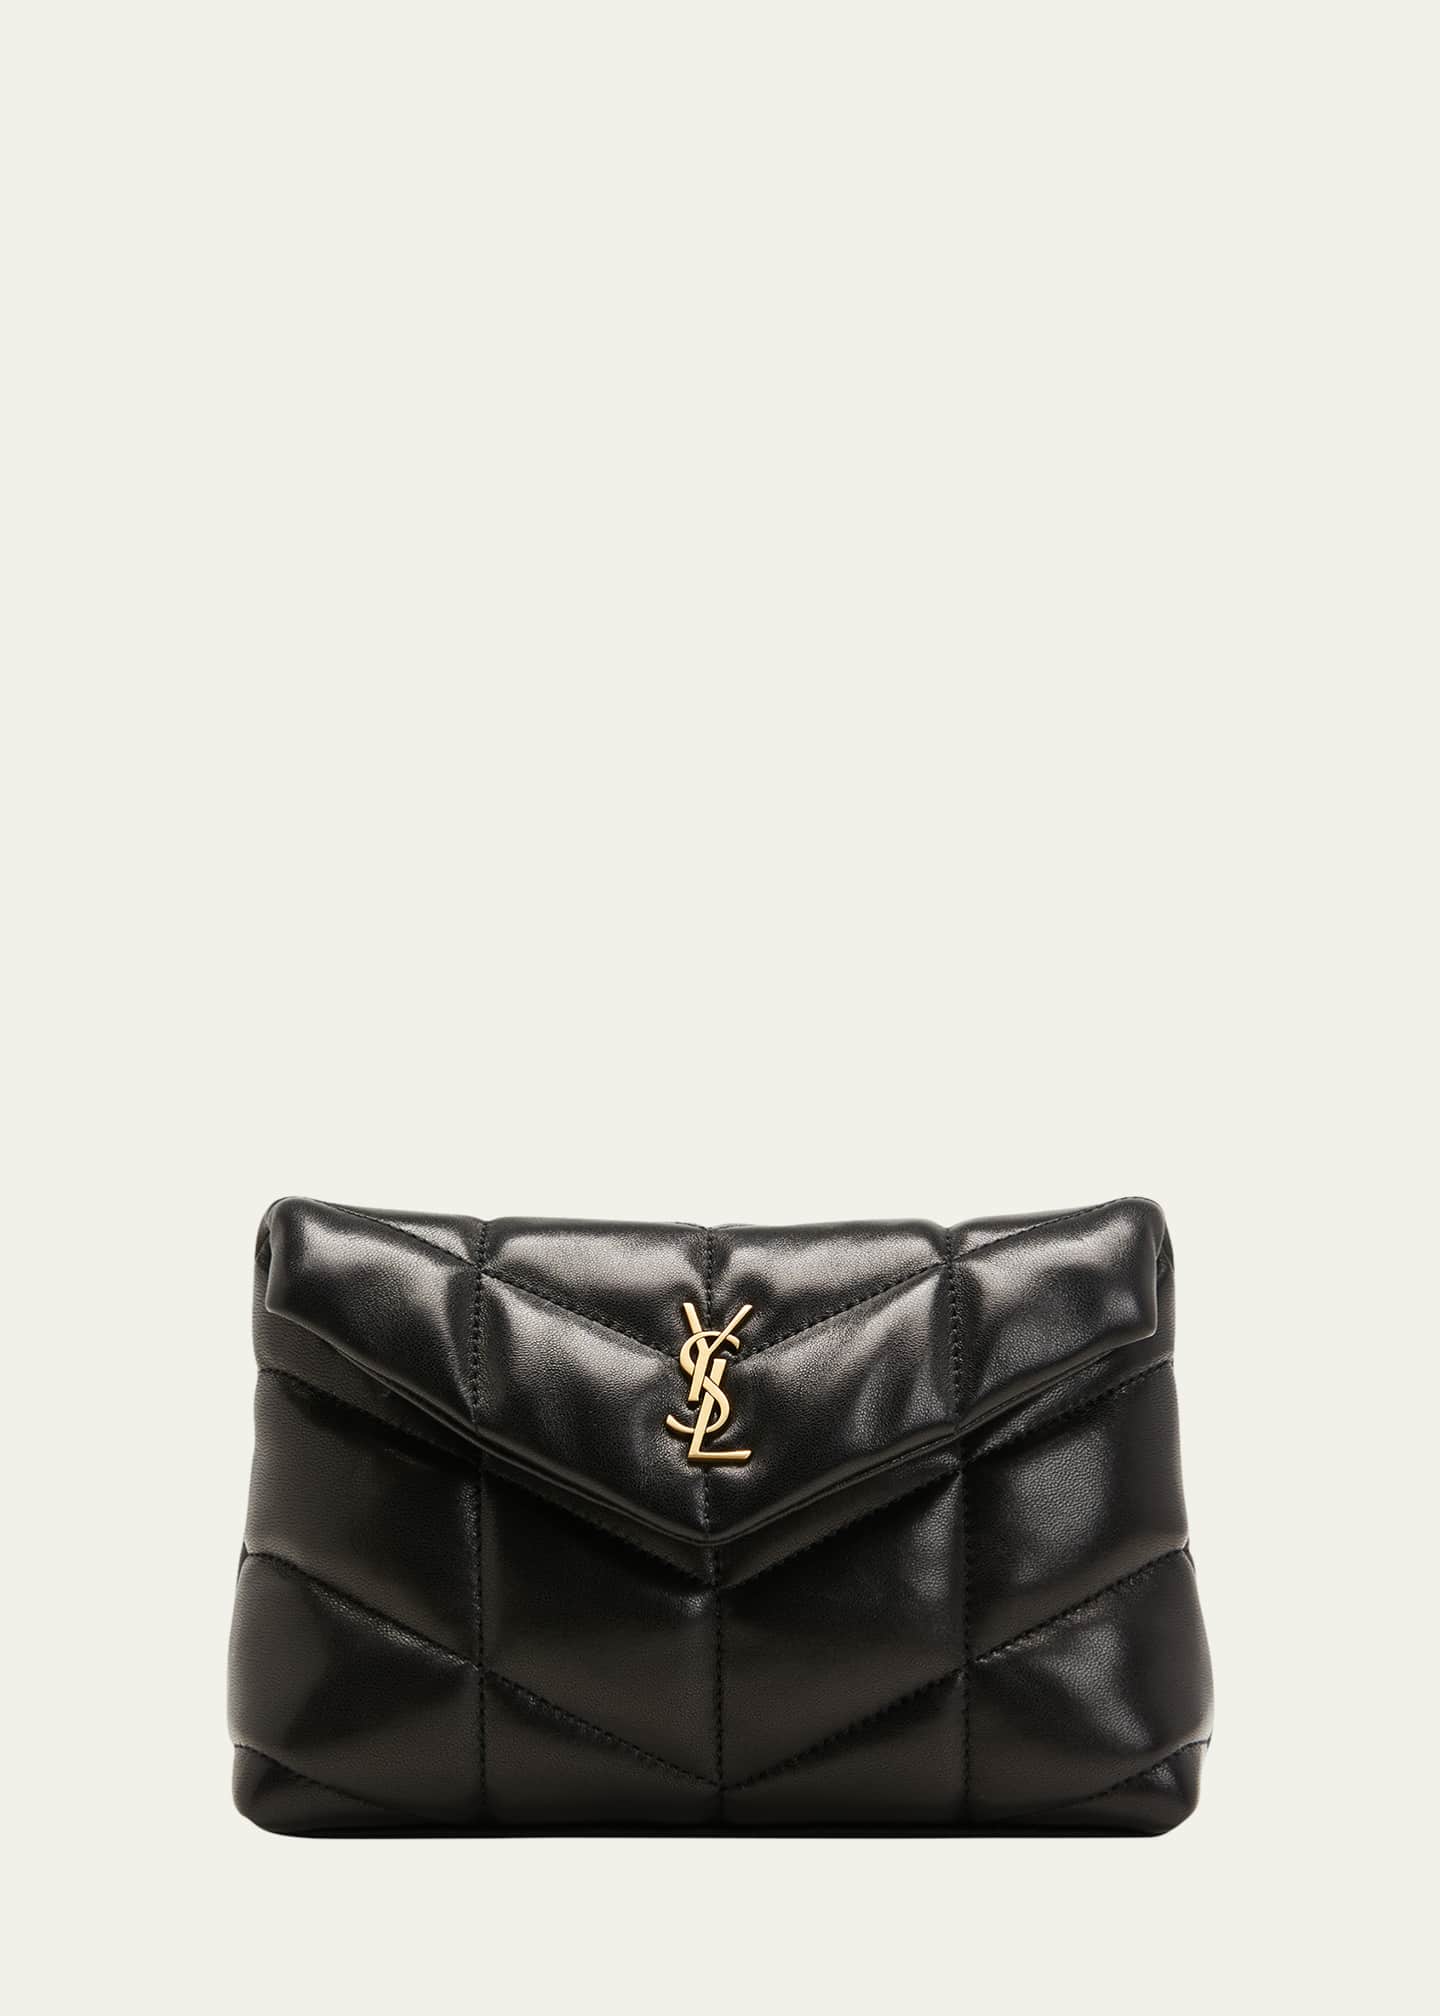 Saint Laurent Puffer Small YSL Quilted Pouch Clutch Bag - Bergdorf Goodman